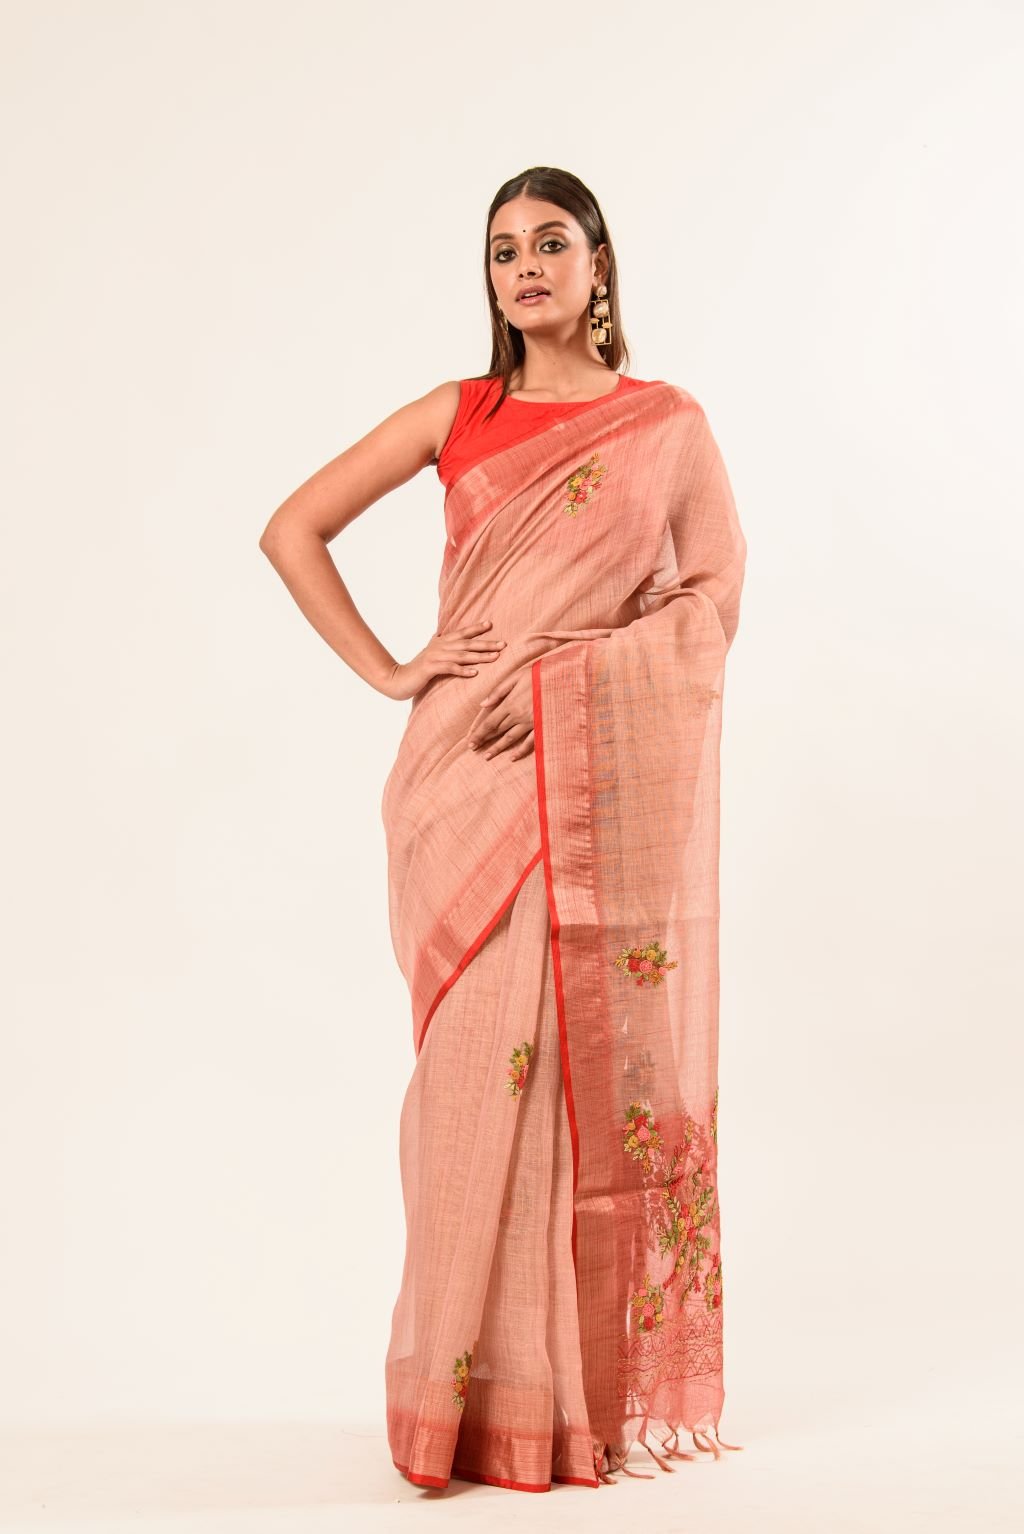 Handloom Cotton Linen Saree with Hand Embroidered Work - Anvi Couture